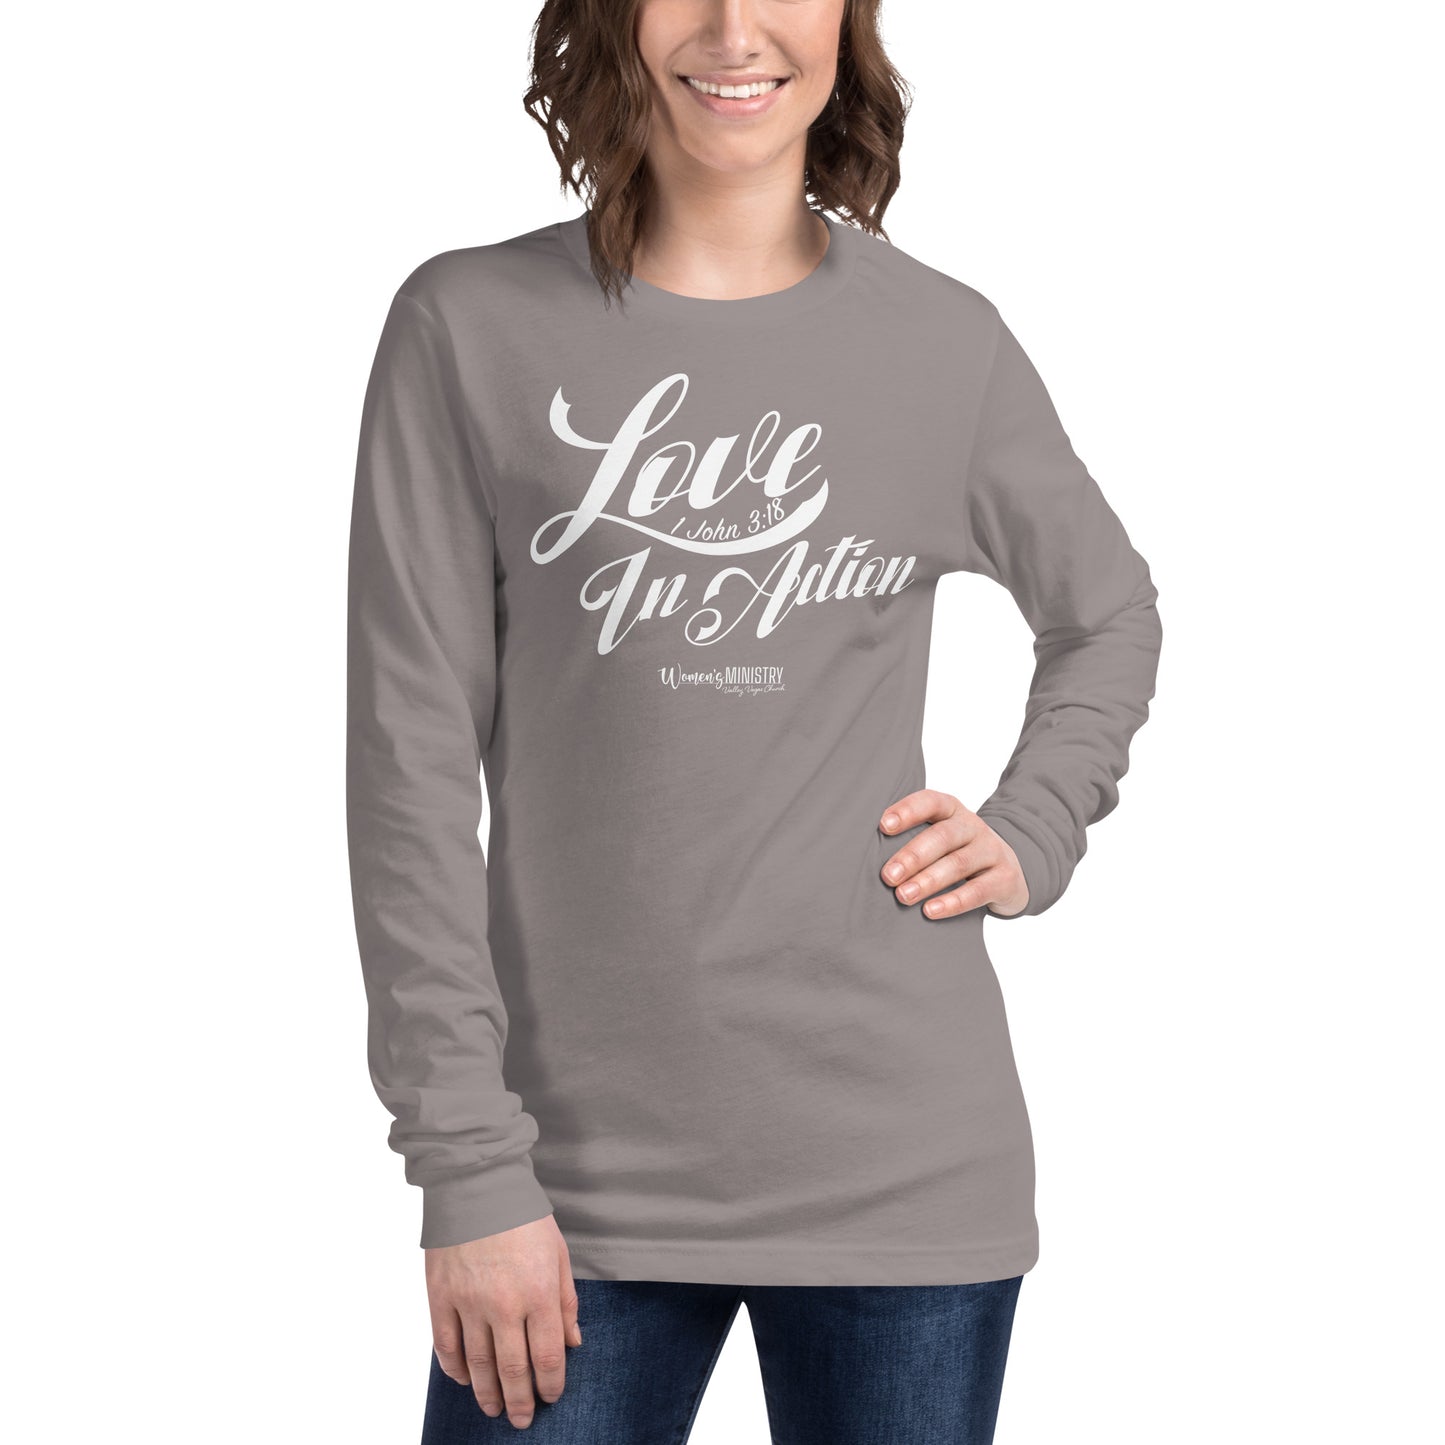 Love In Action | Women's Ministry | Long Sleeve Shirt